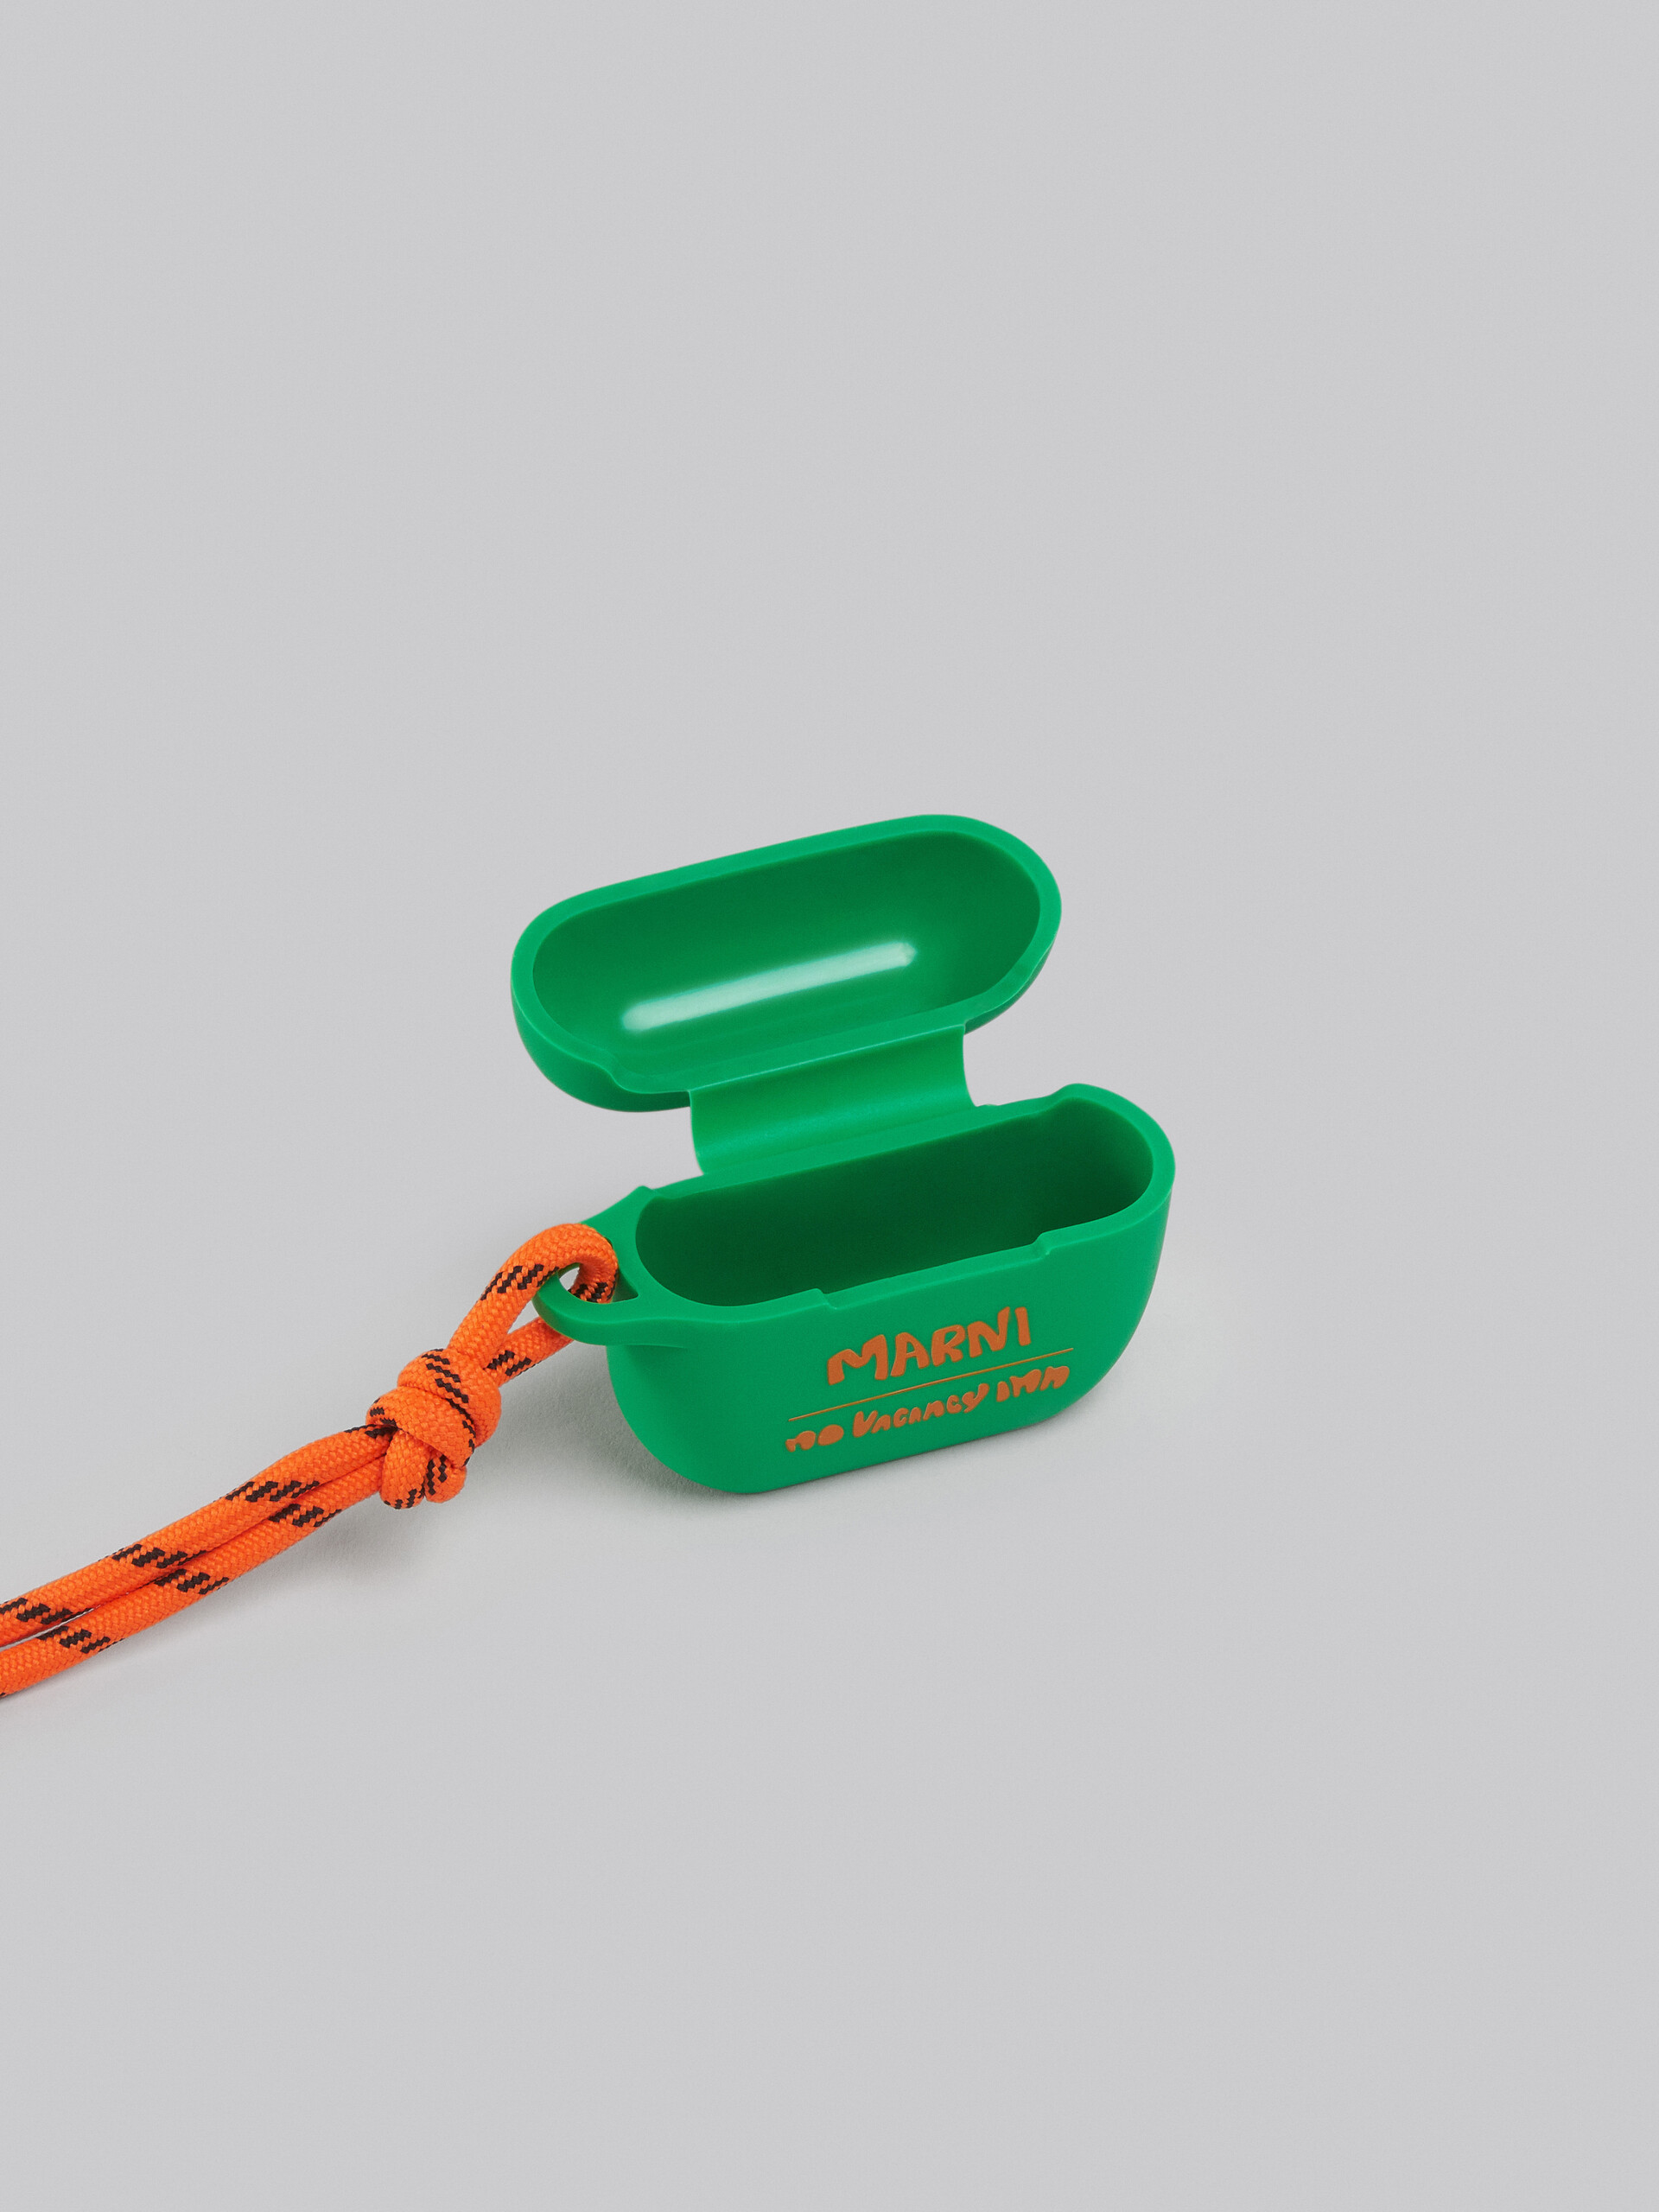 Marni x No Vacancy Inn - Green and orange Airpods case - Other accessories - Image 3